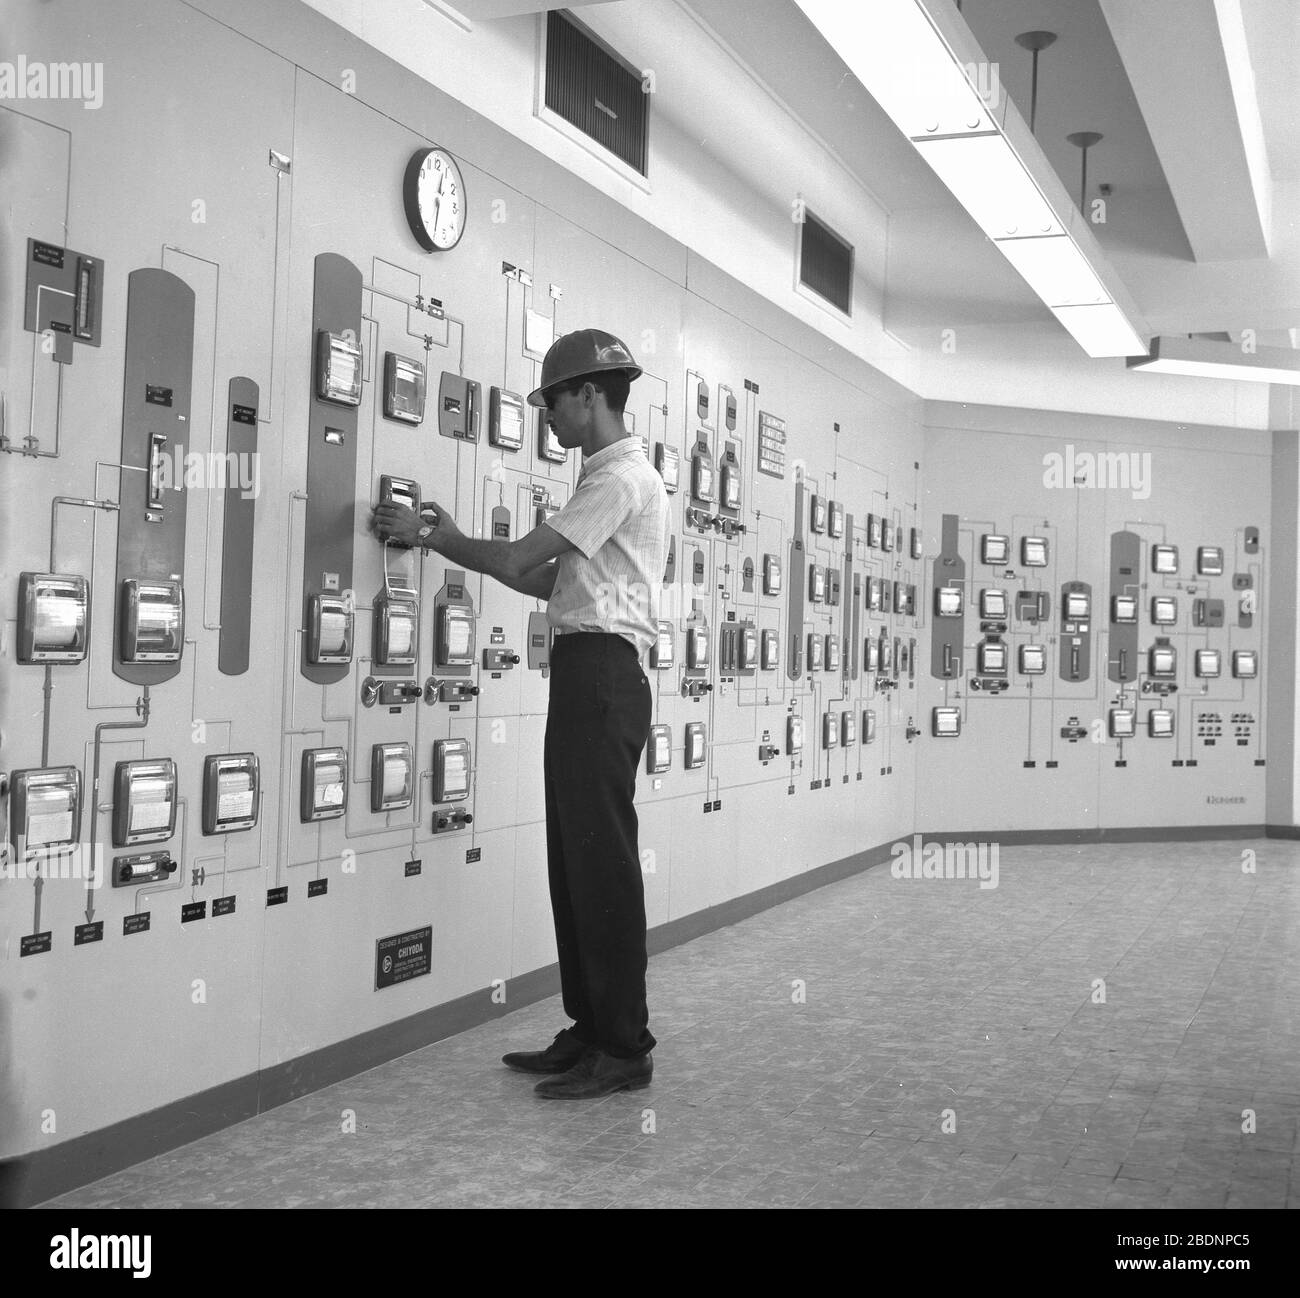 1960s, historical, a male worker wearing a hard-hat standing inside a large control room full of wall-mounted instruments and indicators, possibly at an oil refinery or oil related processing plant, Saudi Arabia. Stock Photo